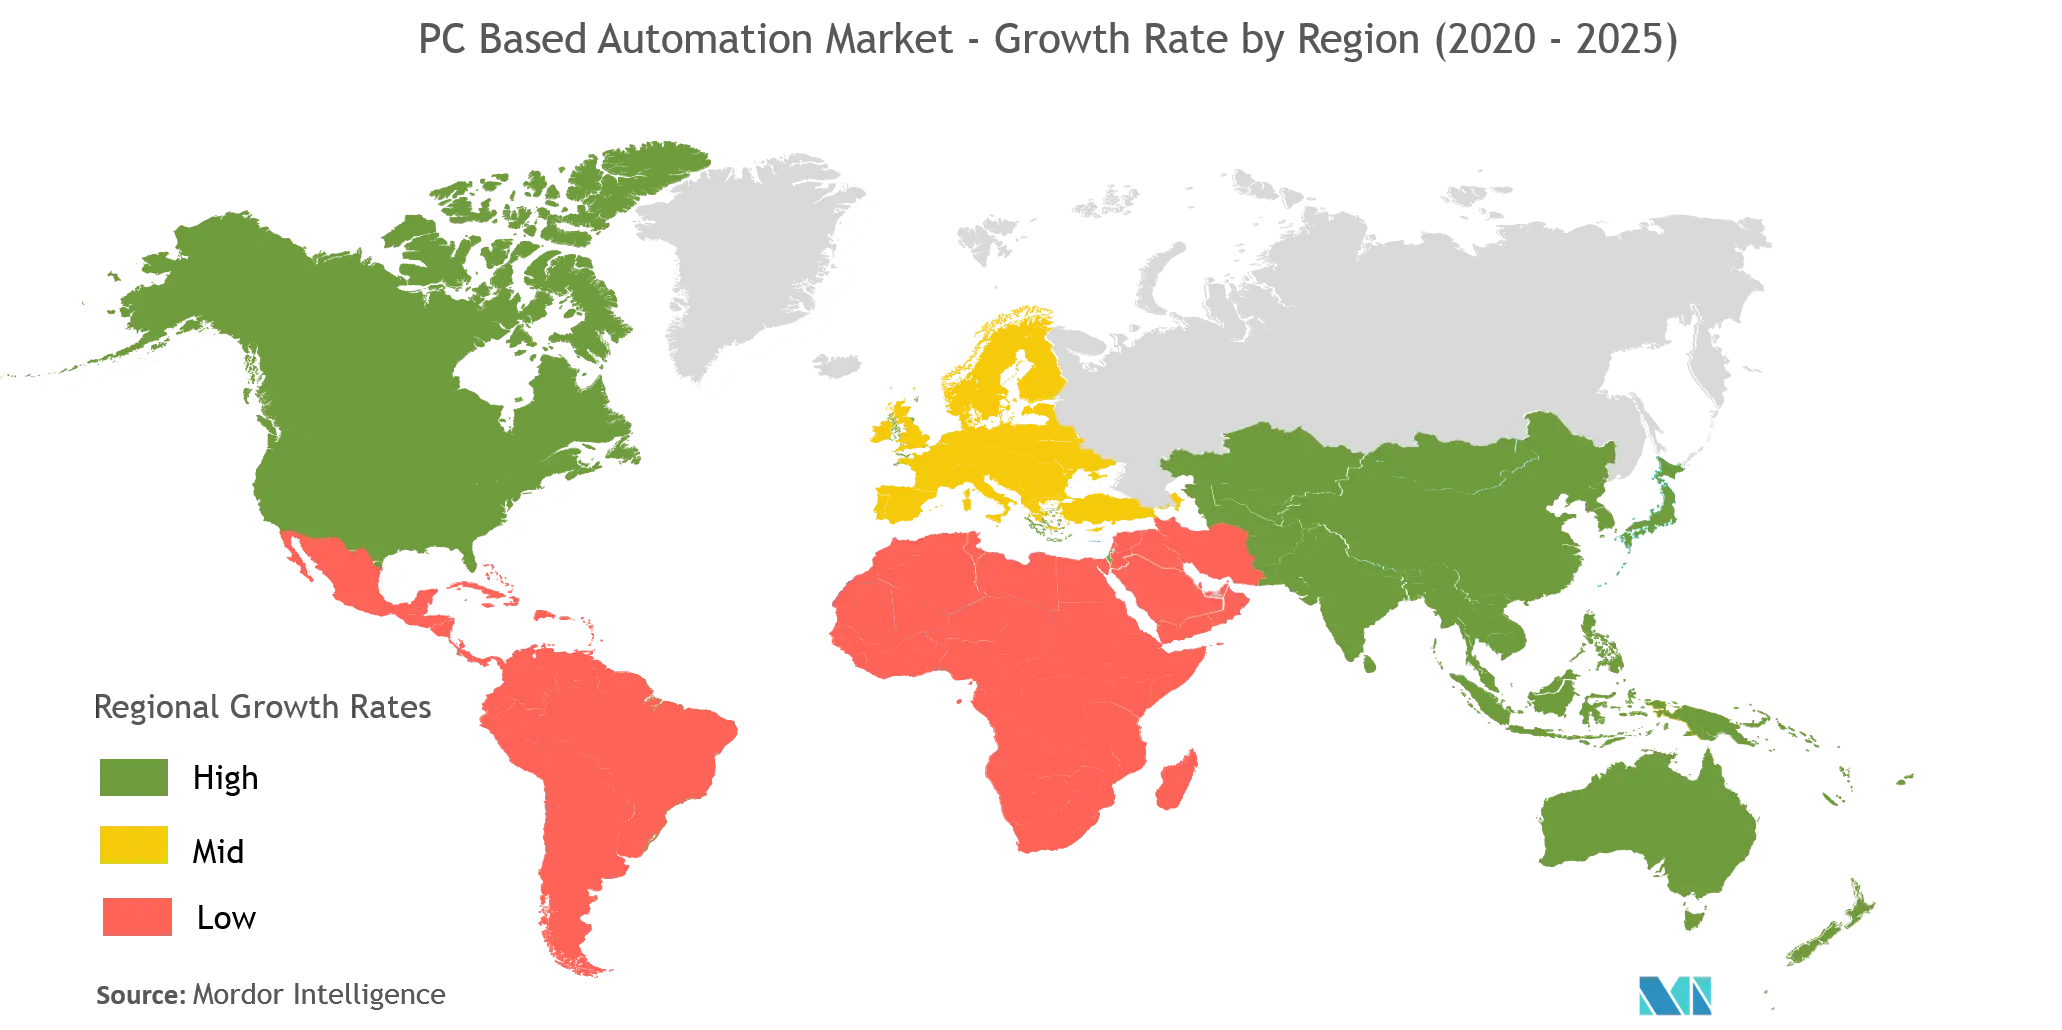 PC based Automation Market growth by region